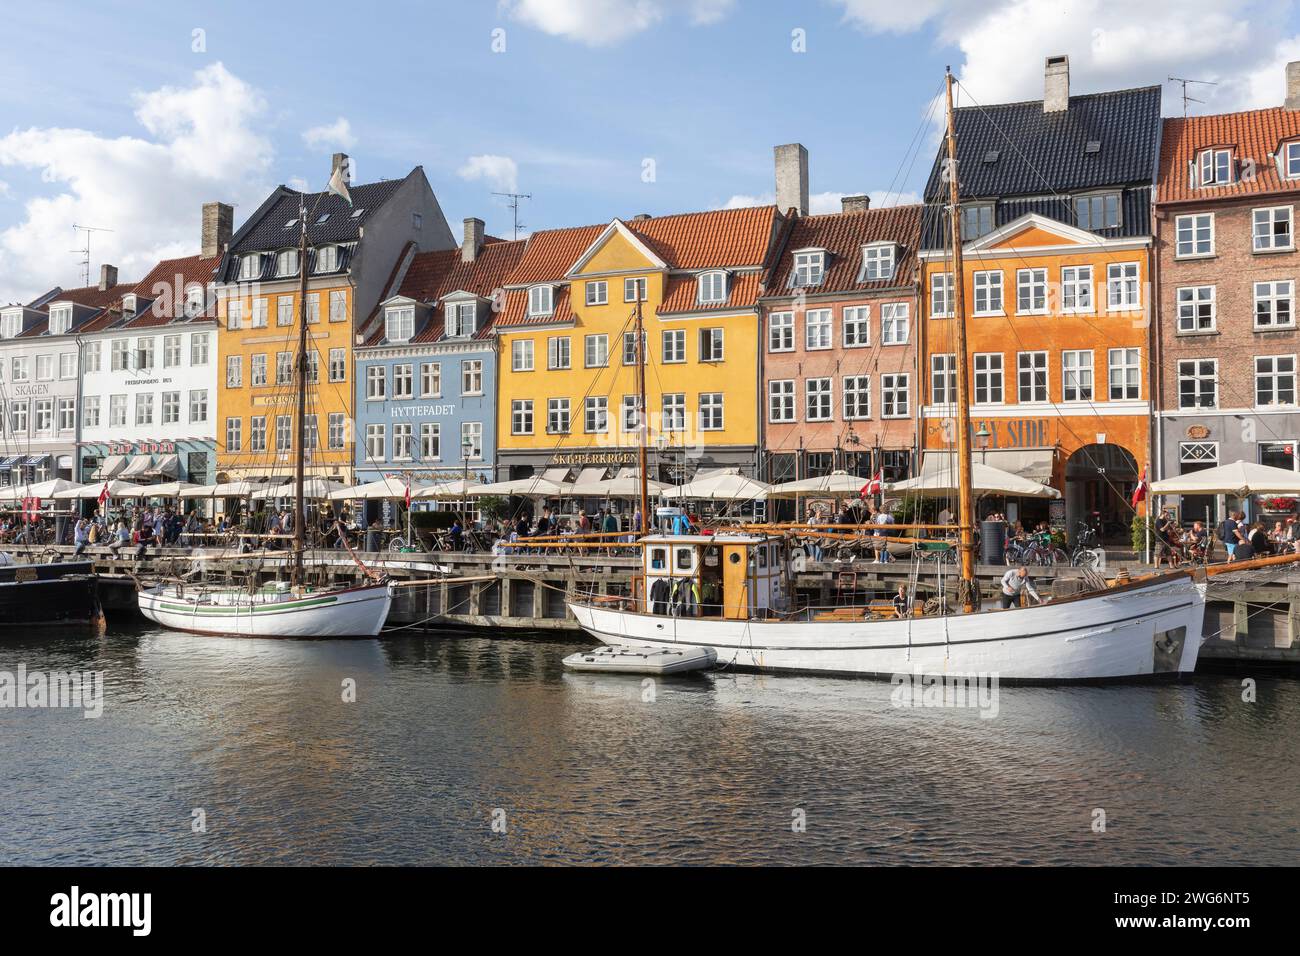 Nyhavn or New Harbour is a 17th-century harbour, canal and entertainment district in Copenhagen. Stock Photo